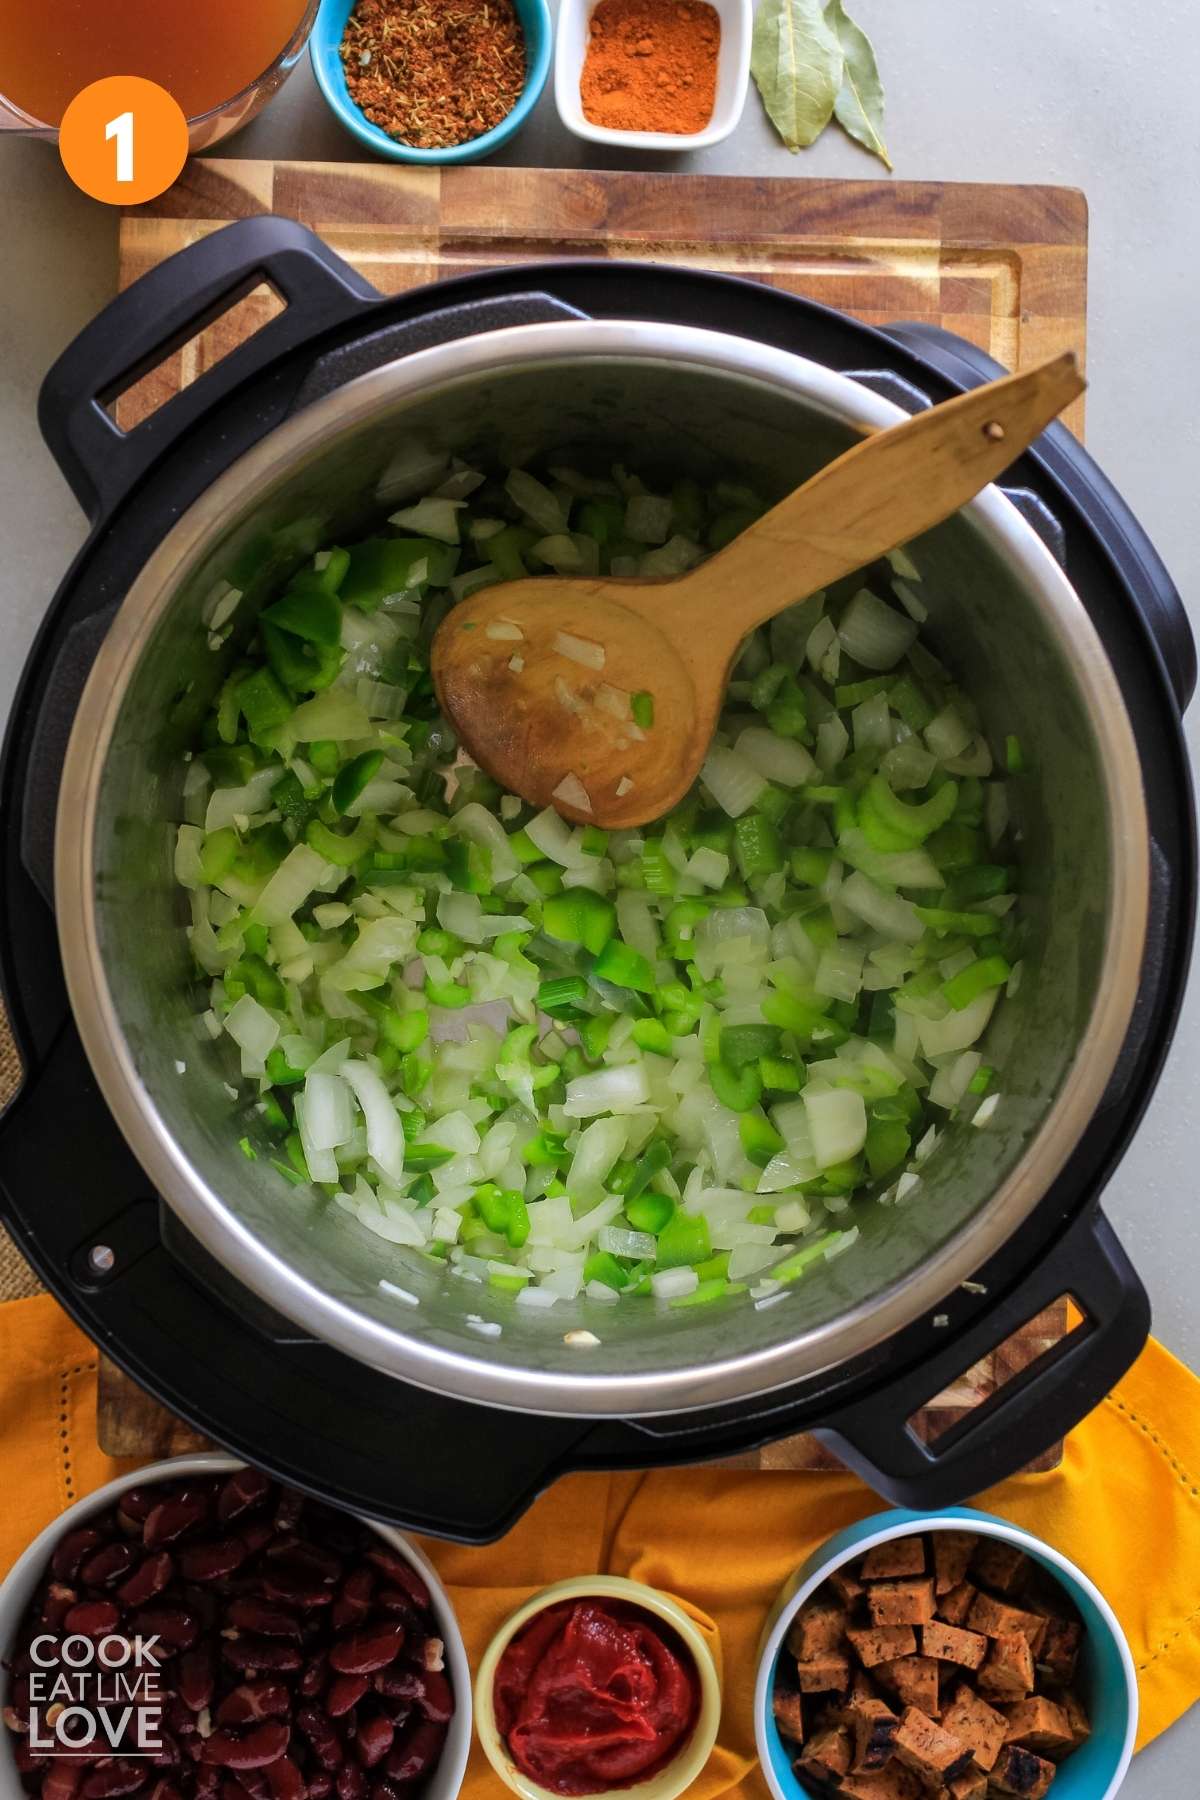 Onions, peppers and celery cooking in instant pot.